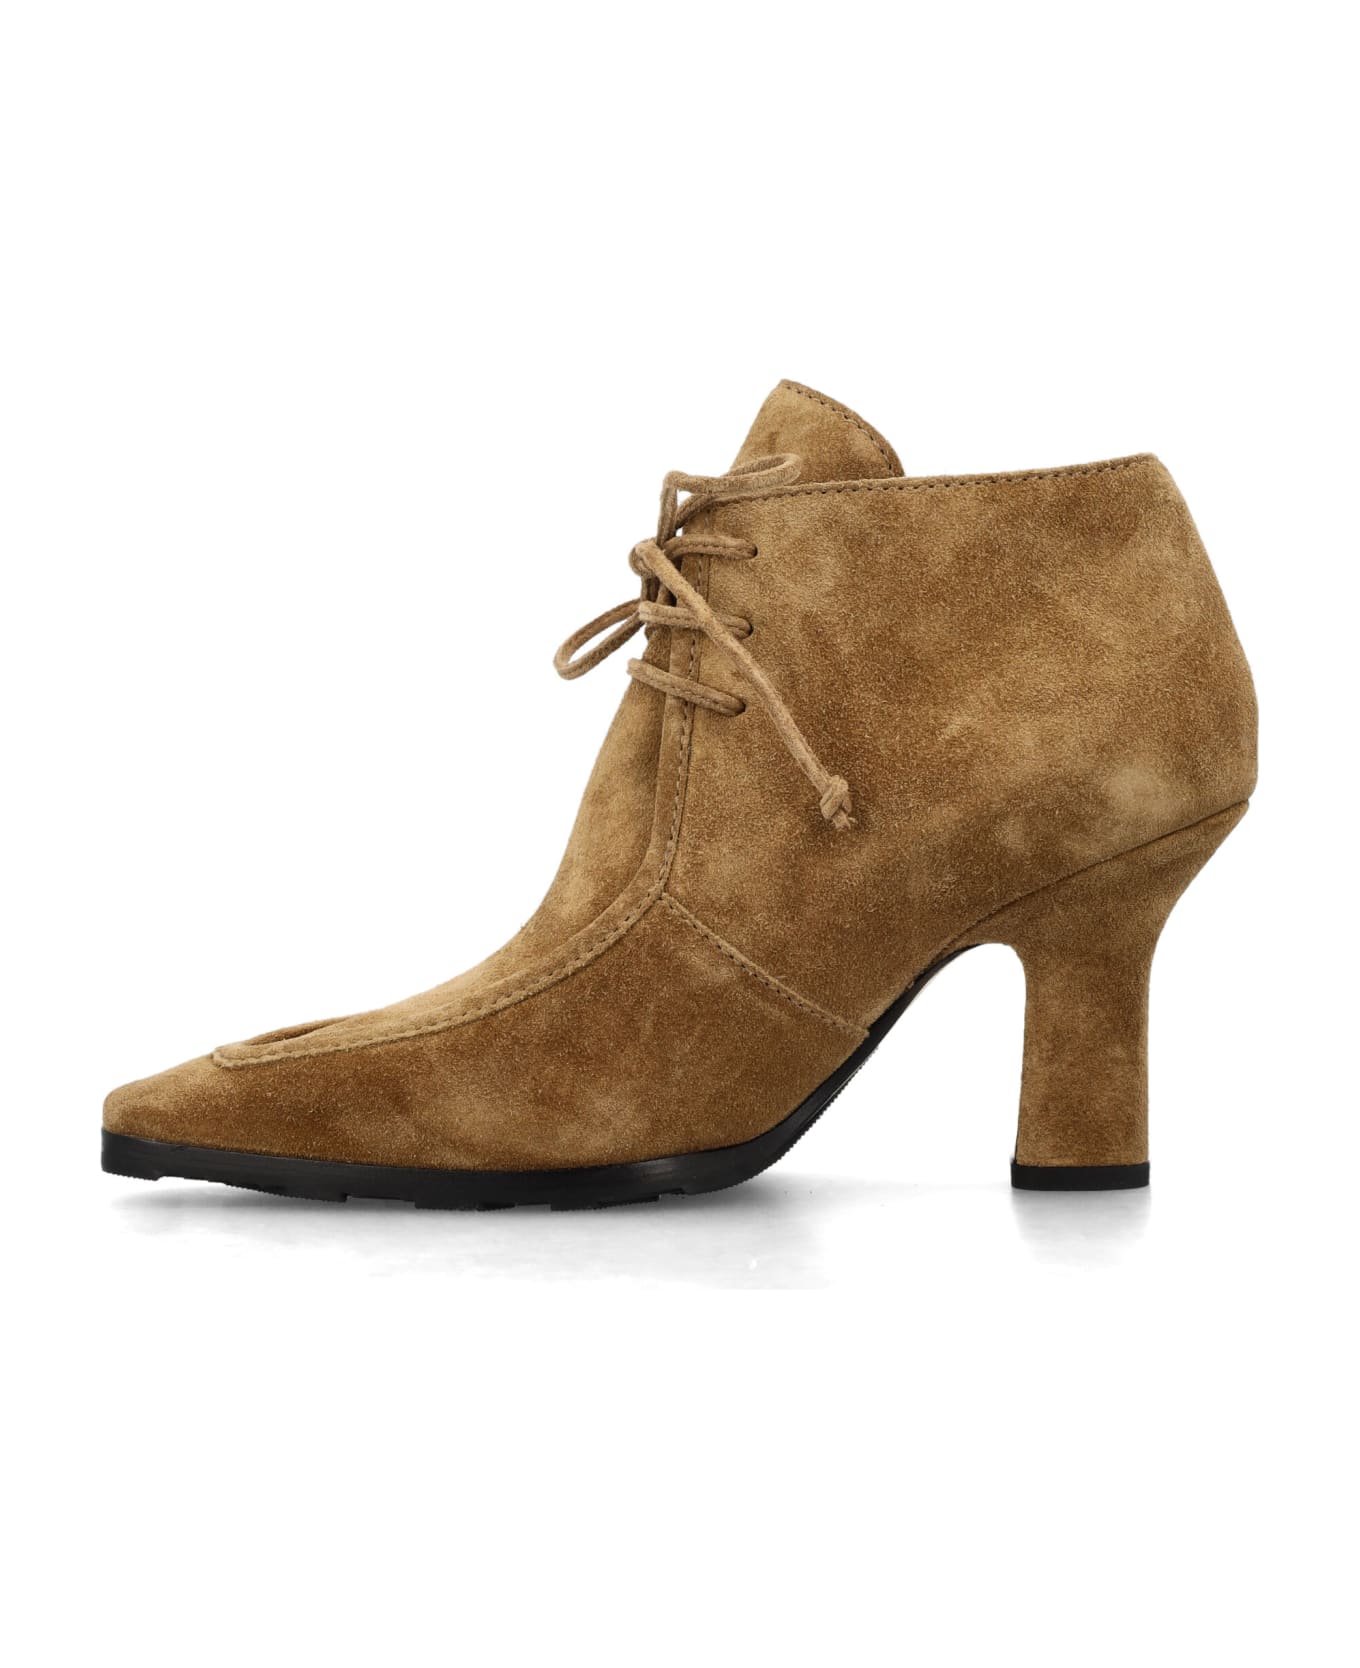 Burberry London Sovereign Suede Lace-up Booties - JUTE